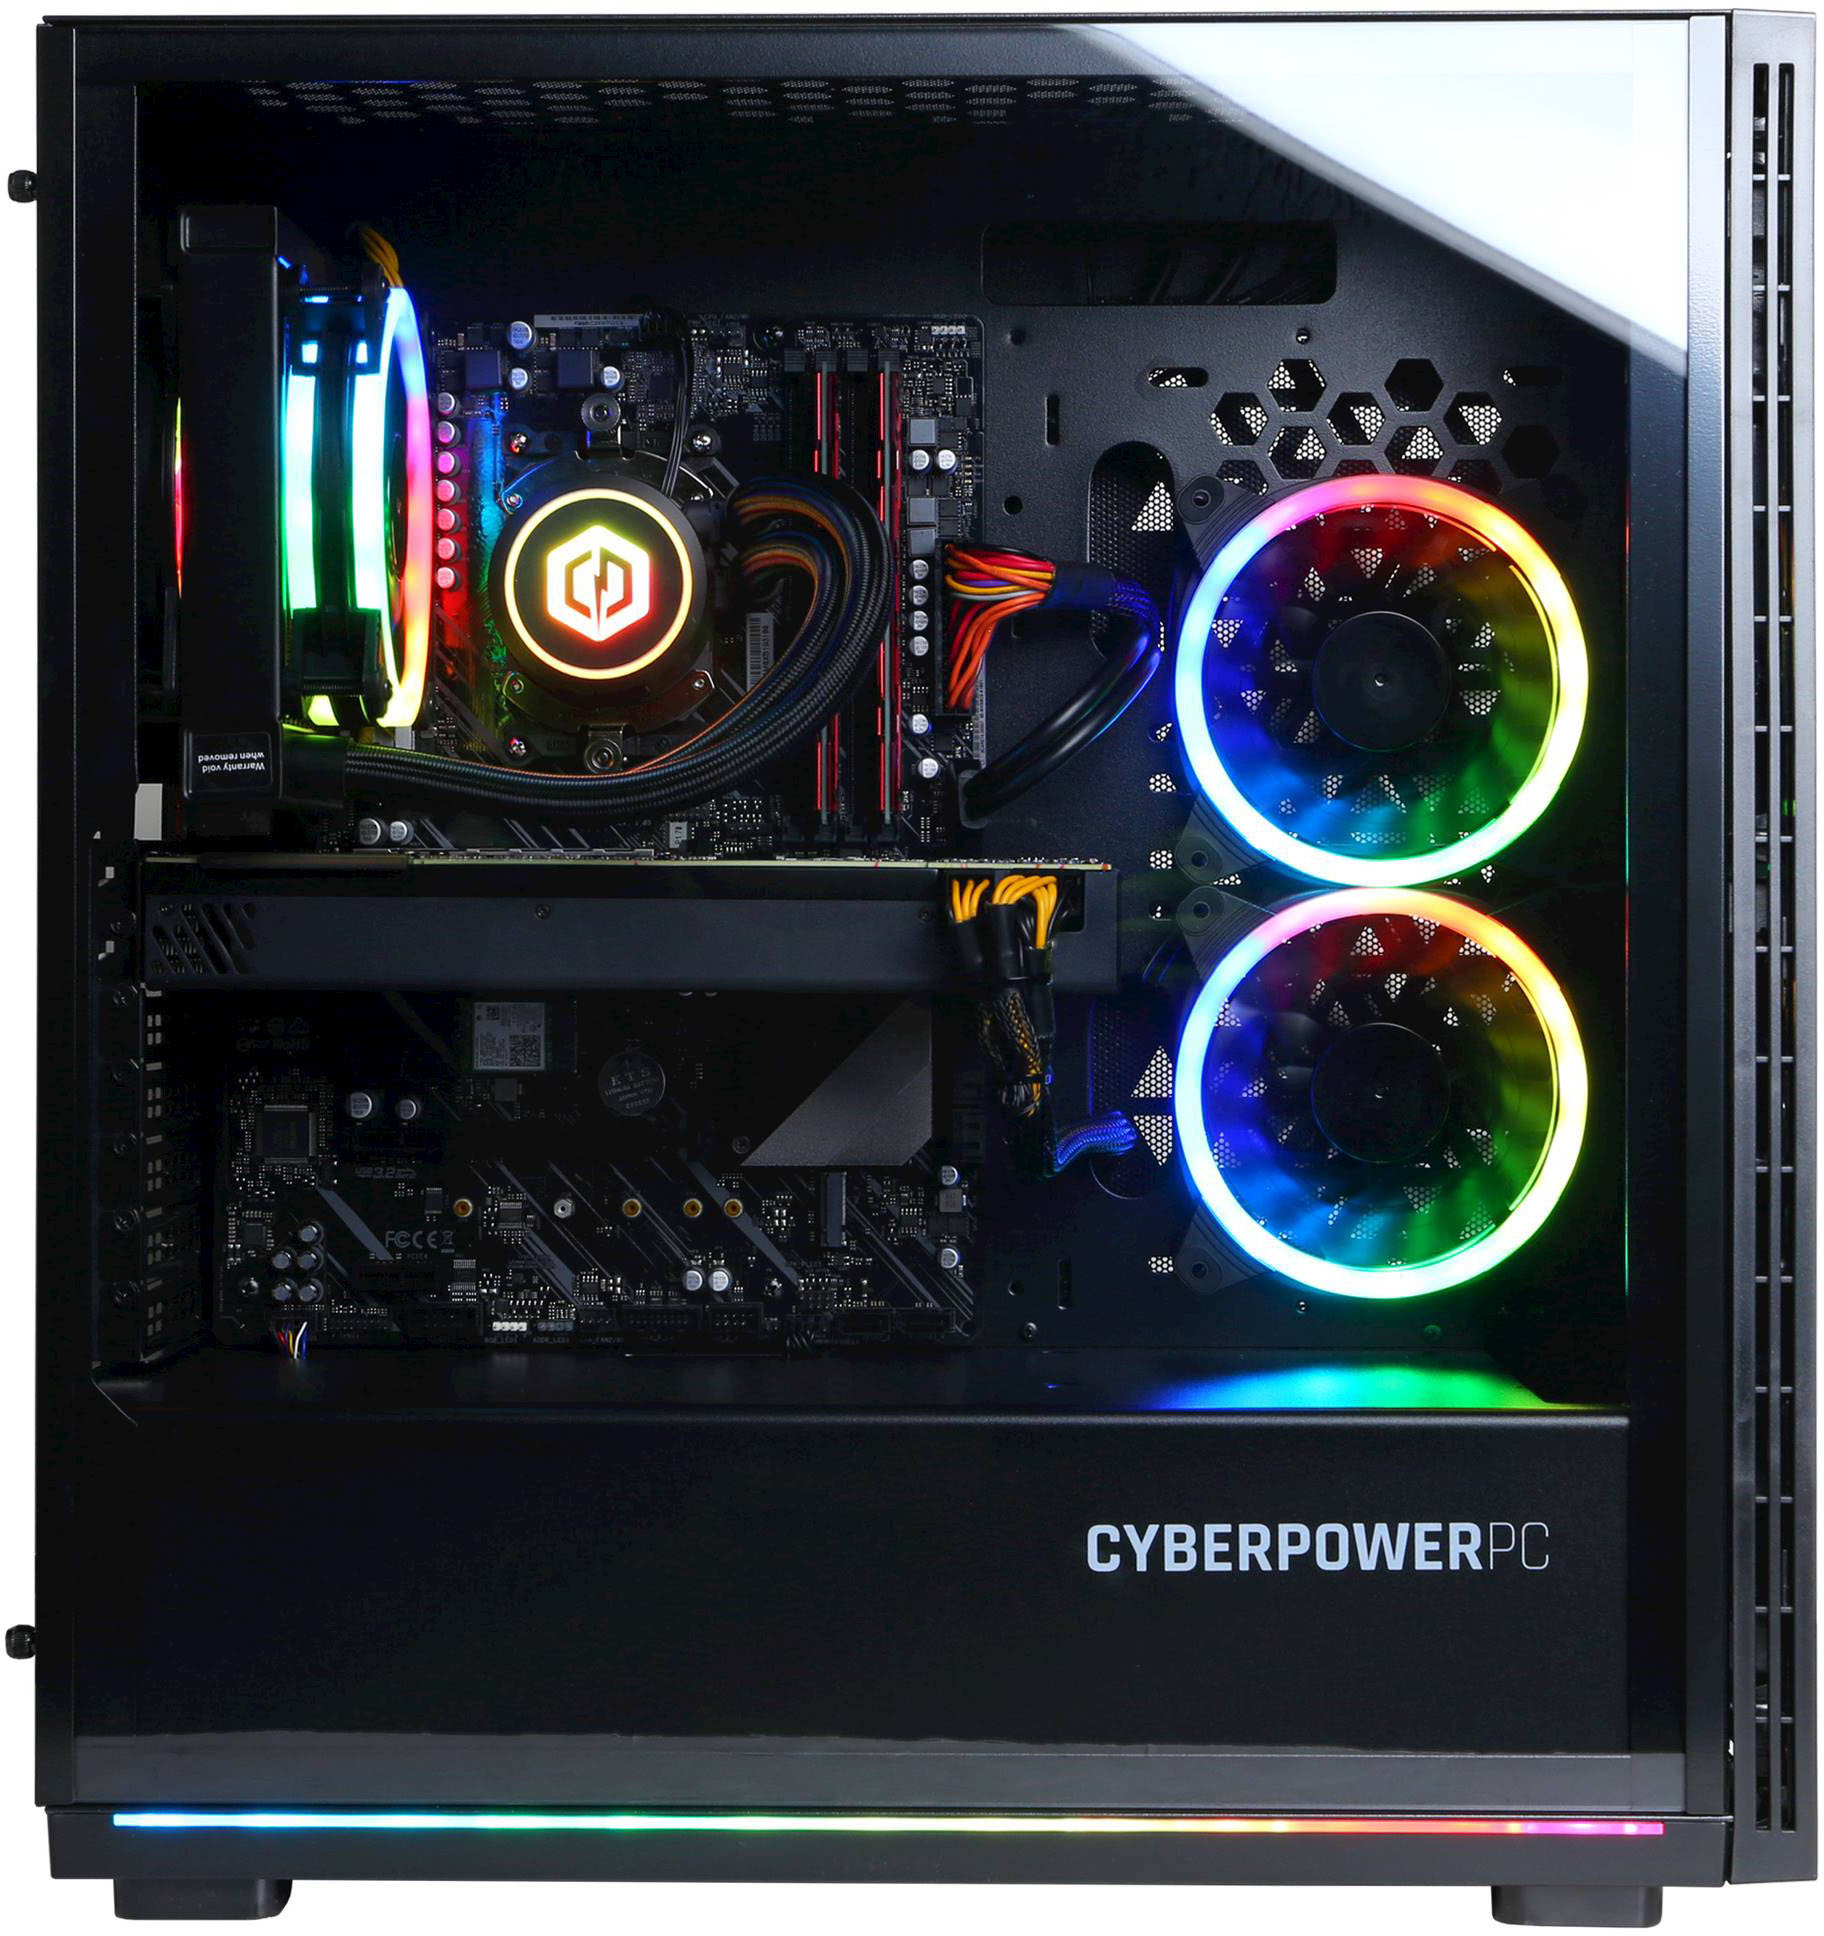 How to Fix Common Gaming PC Problems - CyberPowerPC